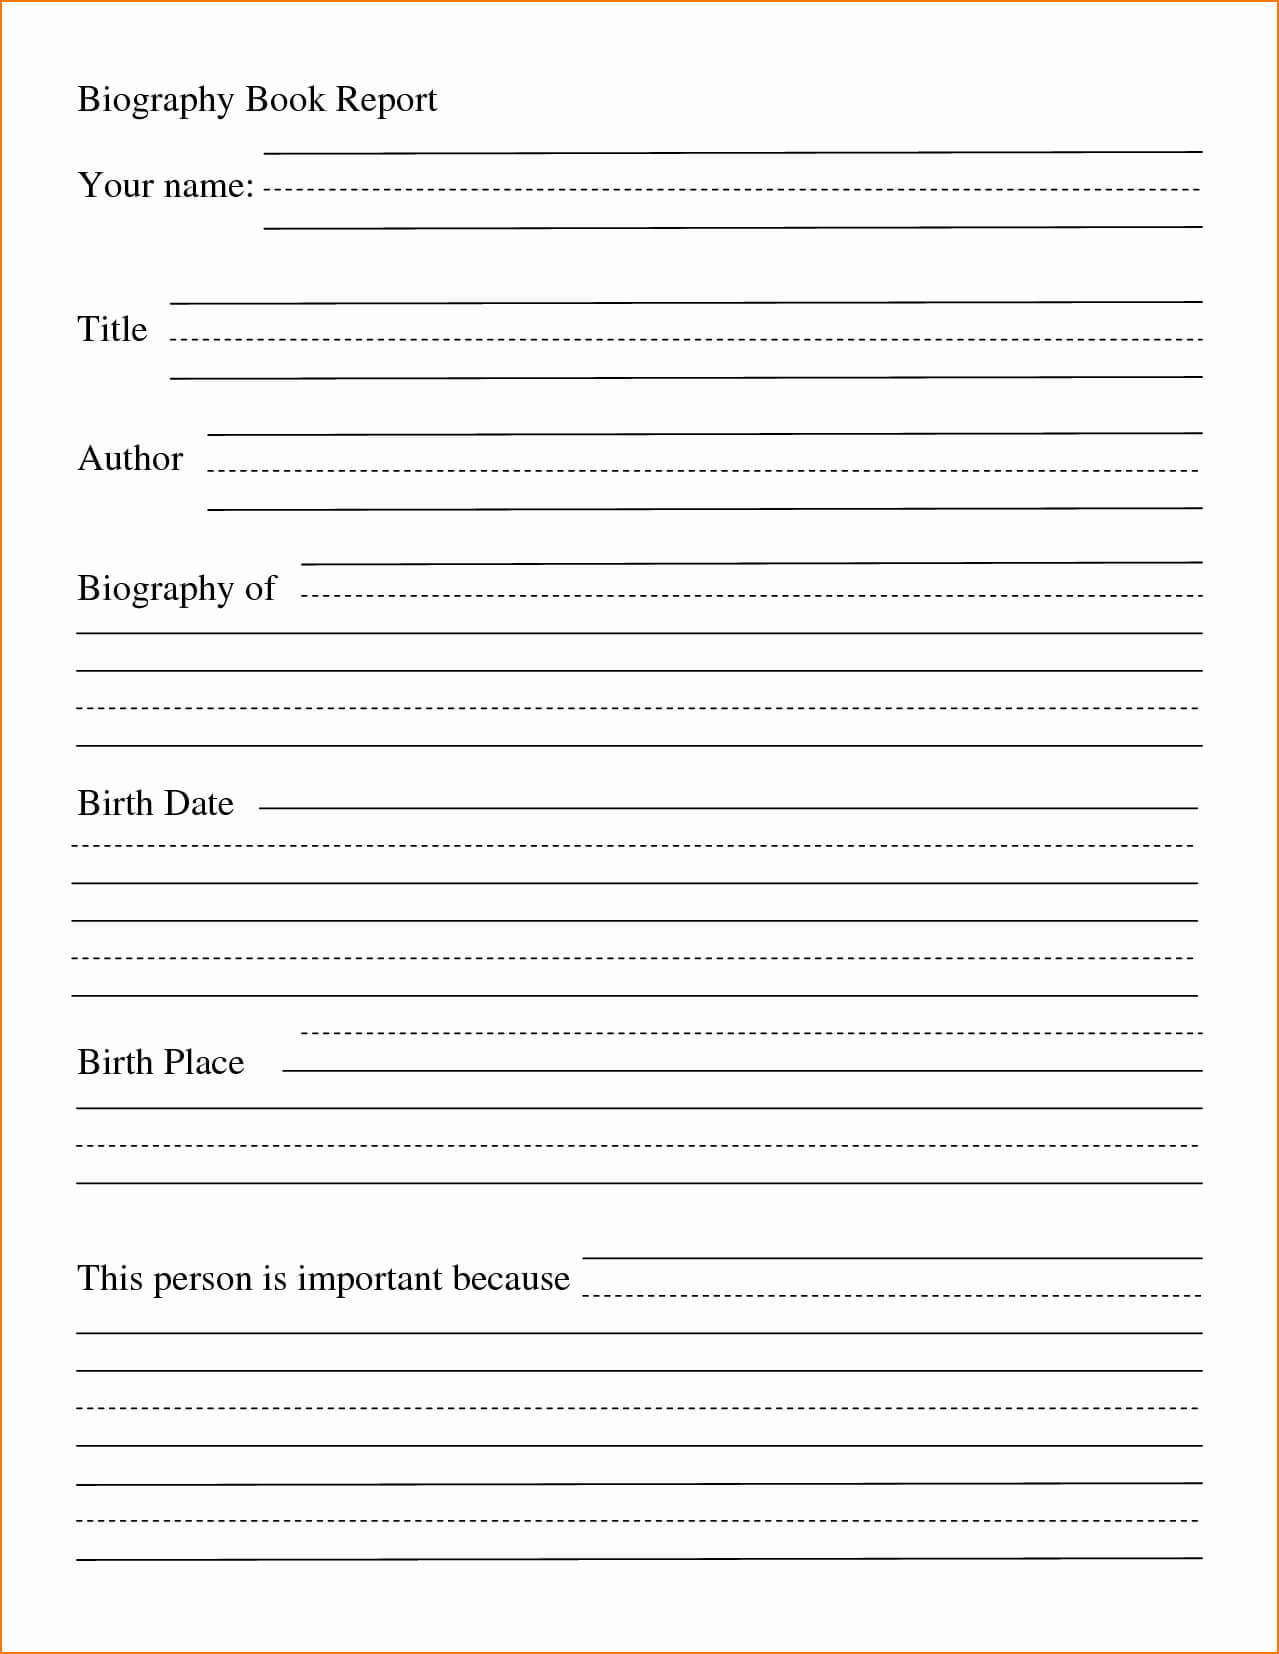 Financial Tatements Template Pdf For 2Nd Grade Book Report With Regard To 2Nd Grade Book Report Template